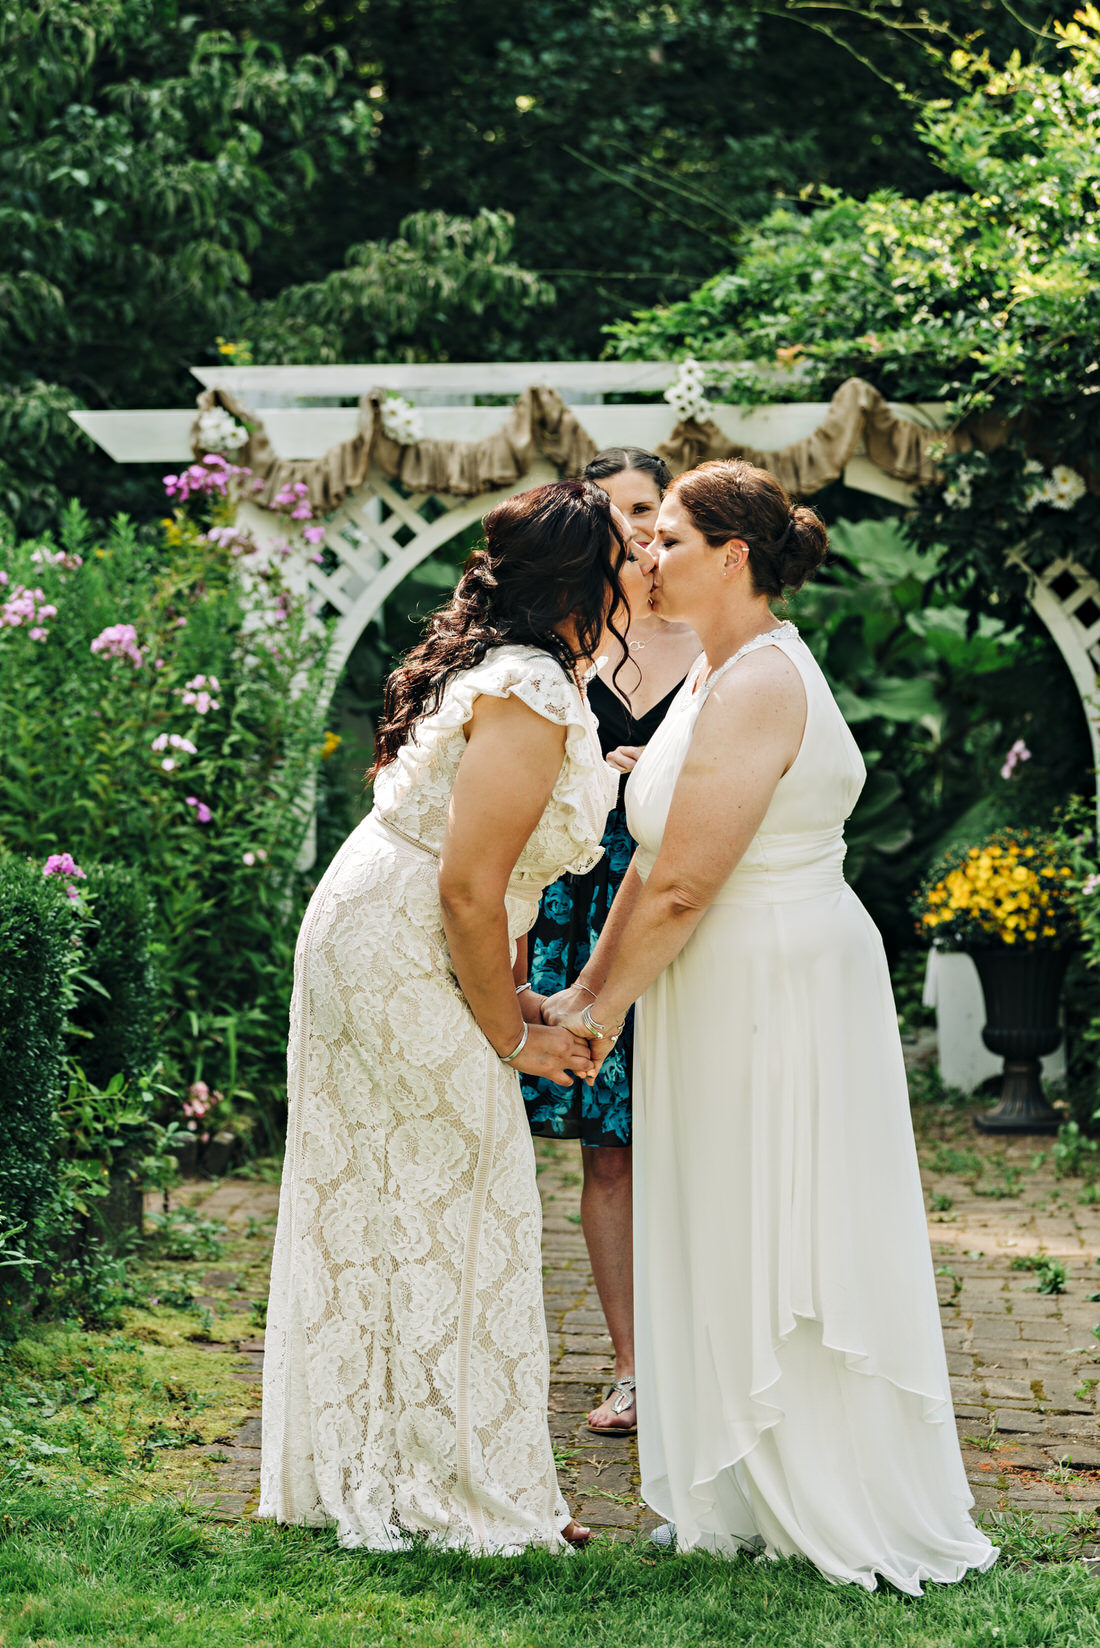 Brides first kiss as wives